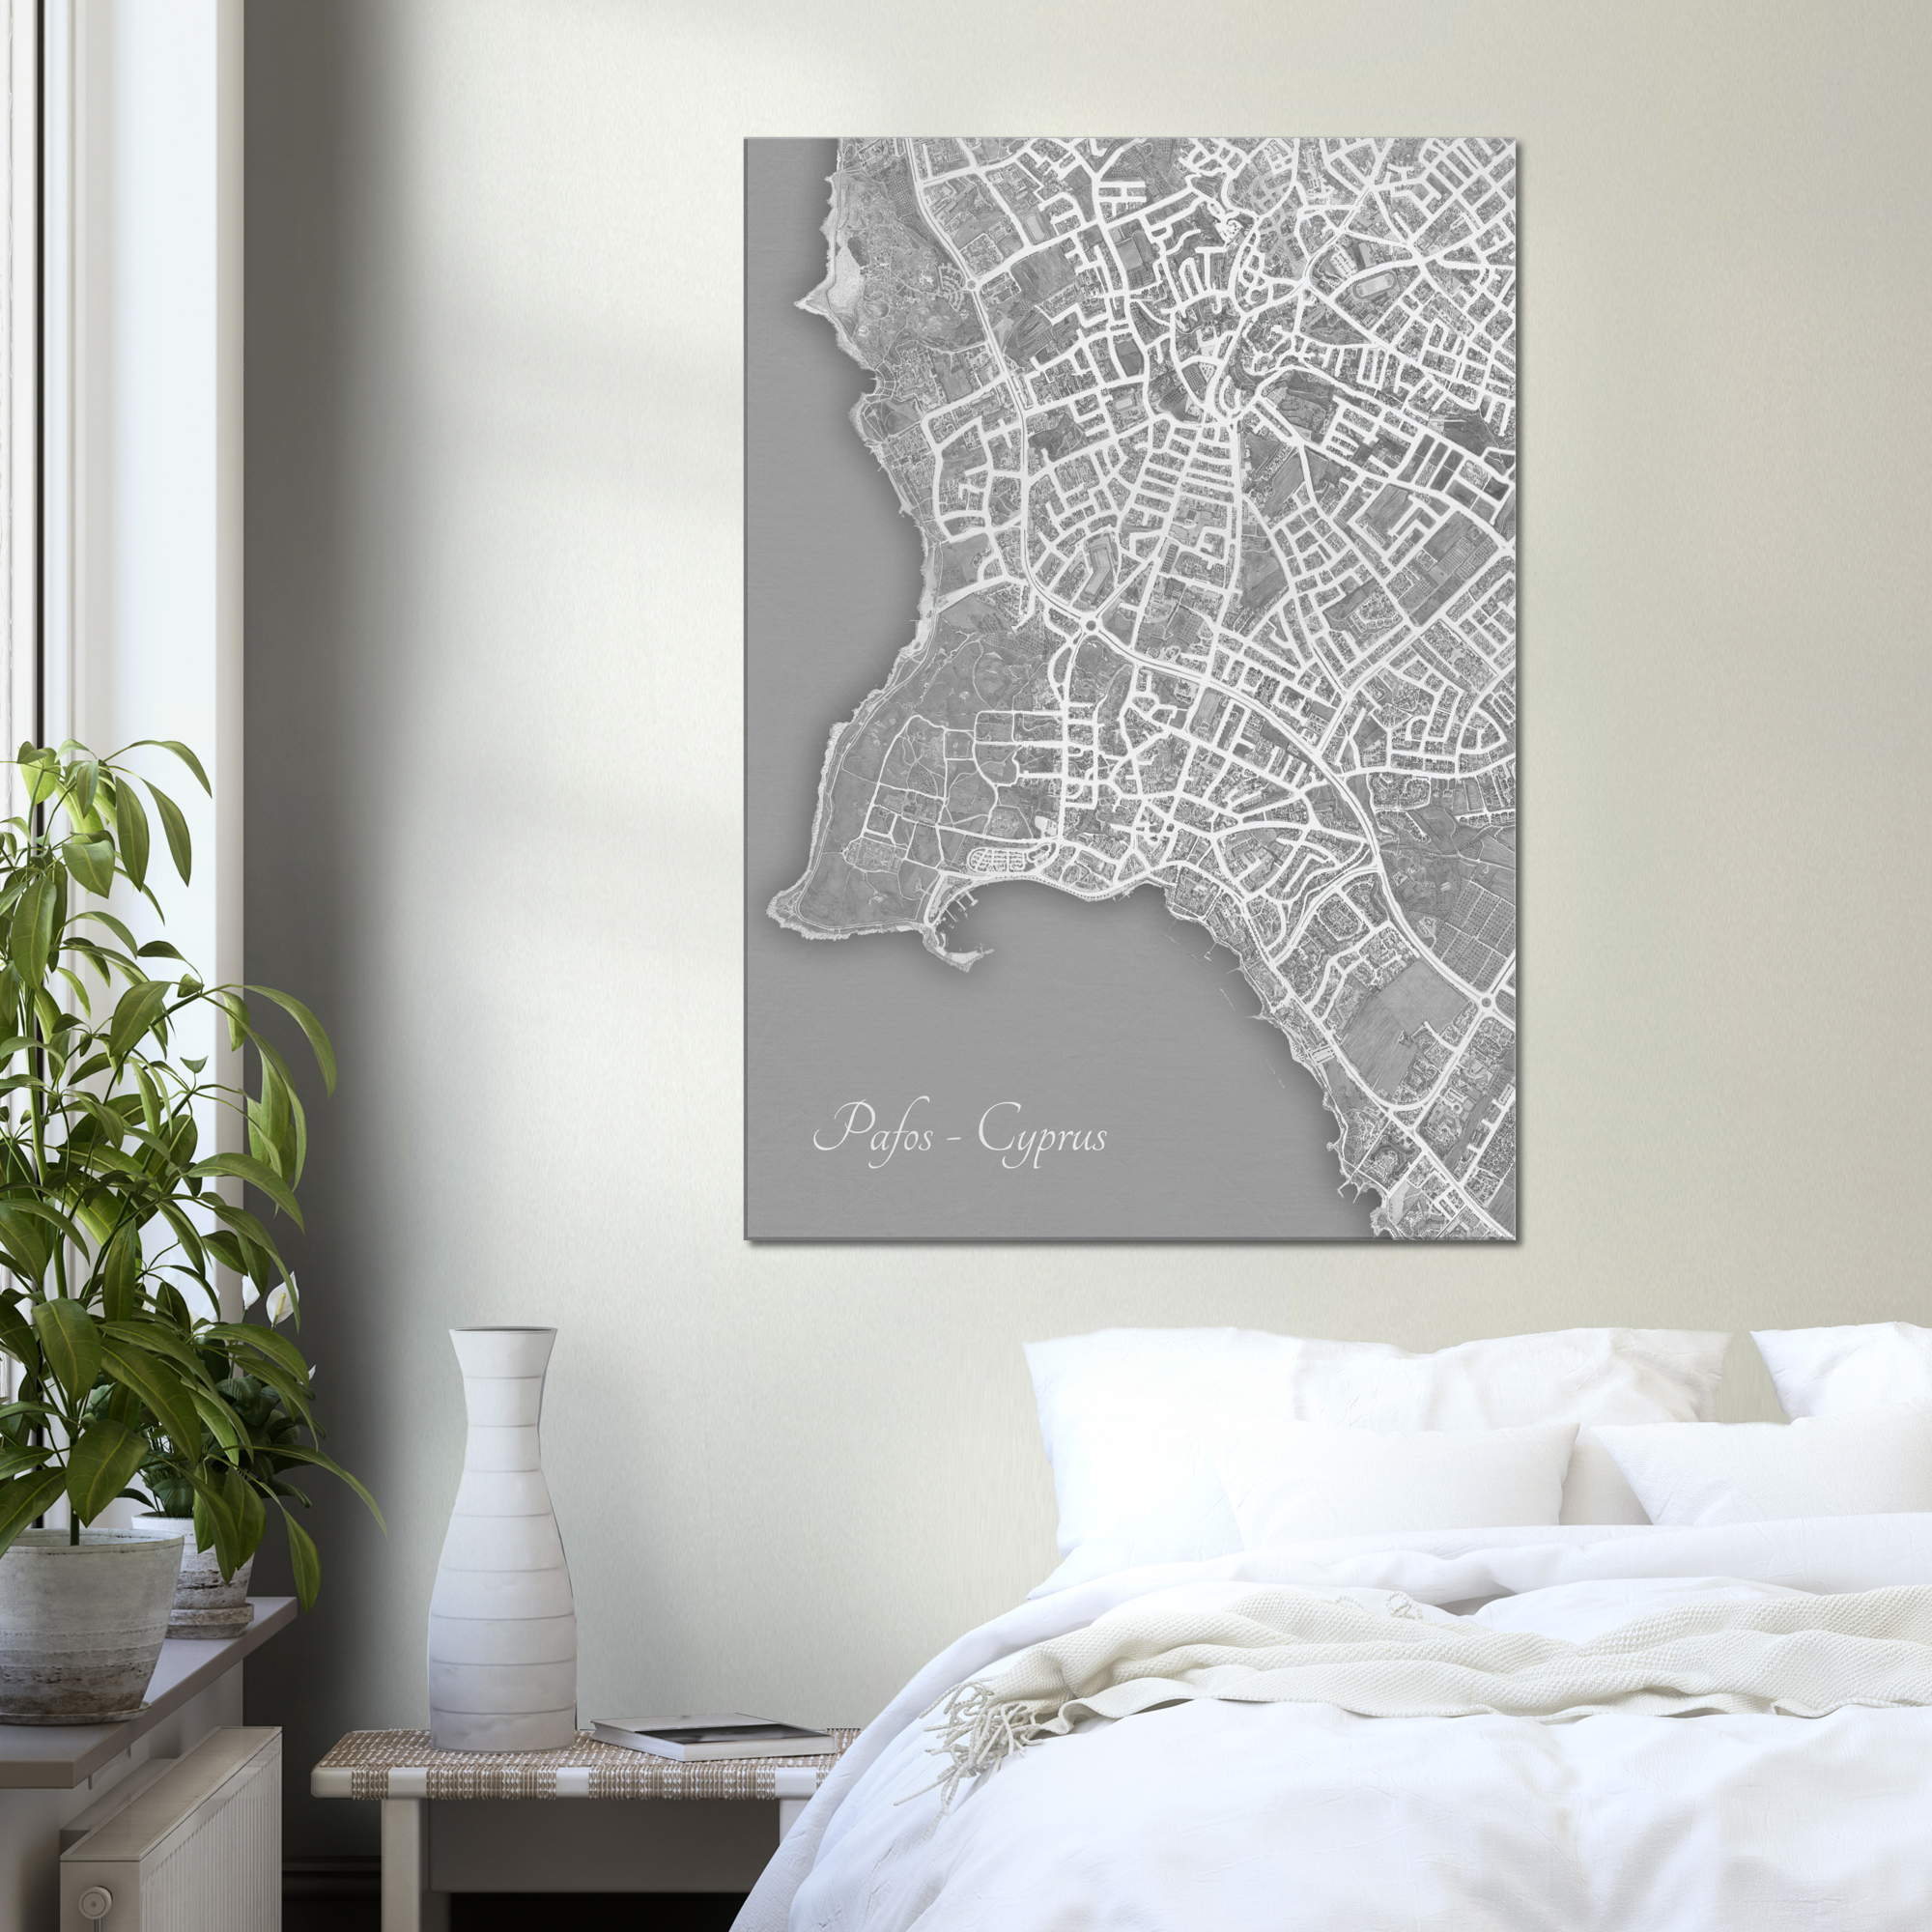 Pafos Town, Cyprus - Black & White Canvas Print - Framed